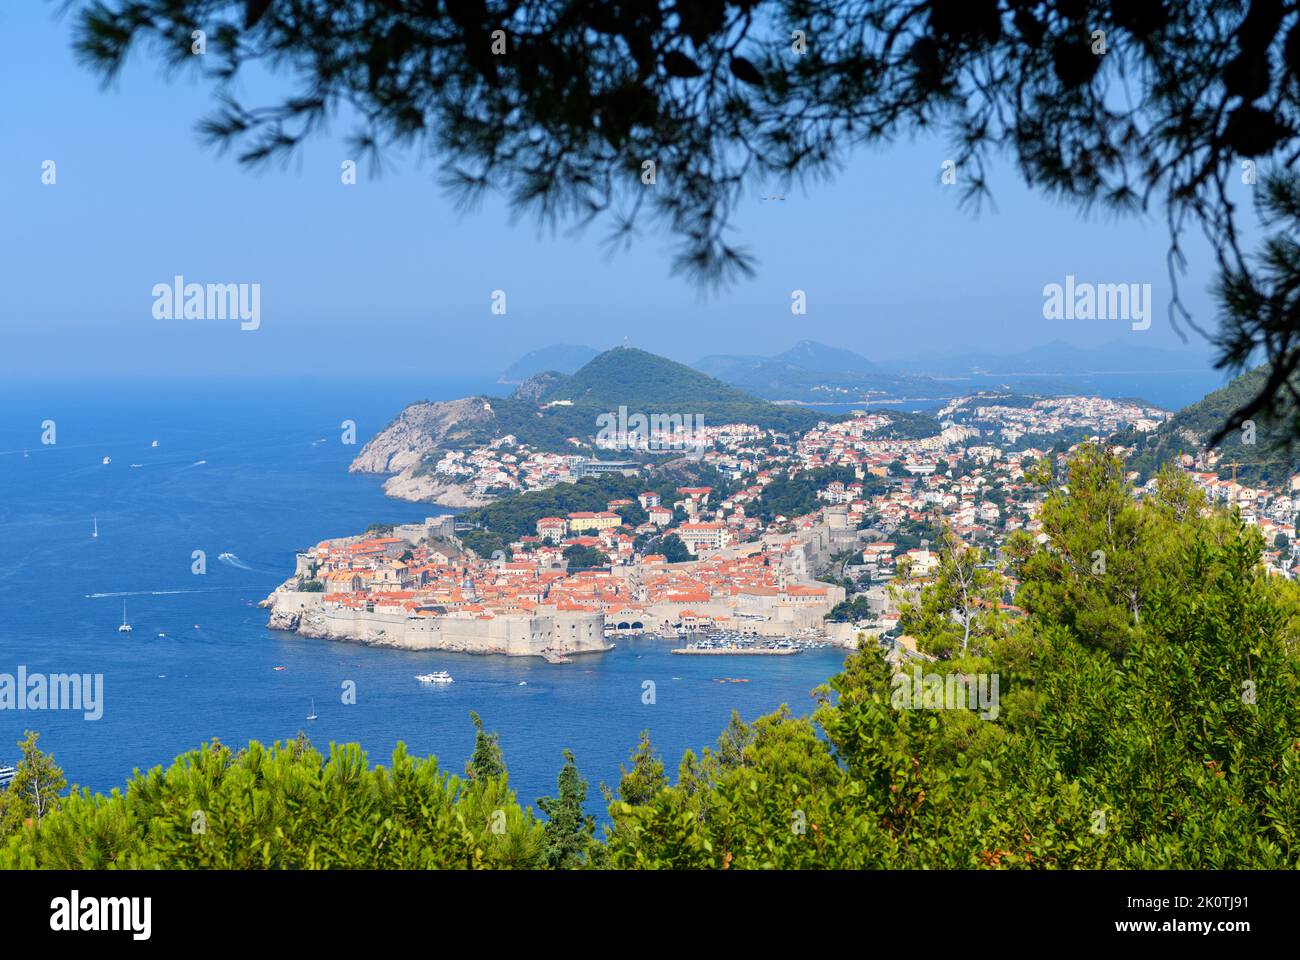 View over the Old Town, Dubrovnik, Croatia Stock Photo